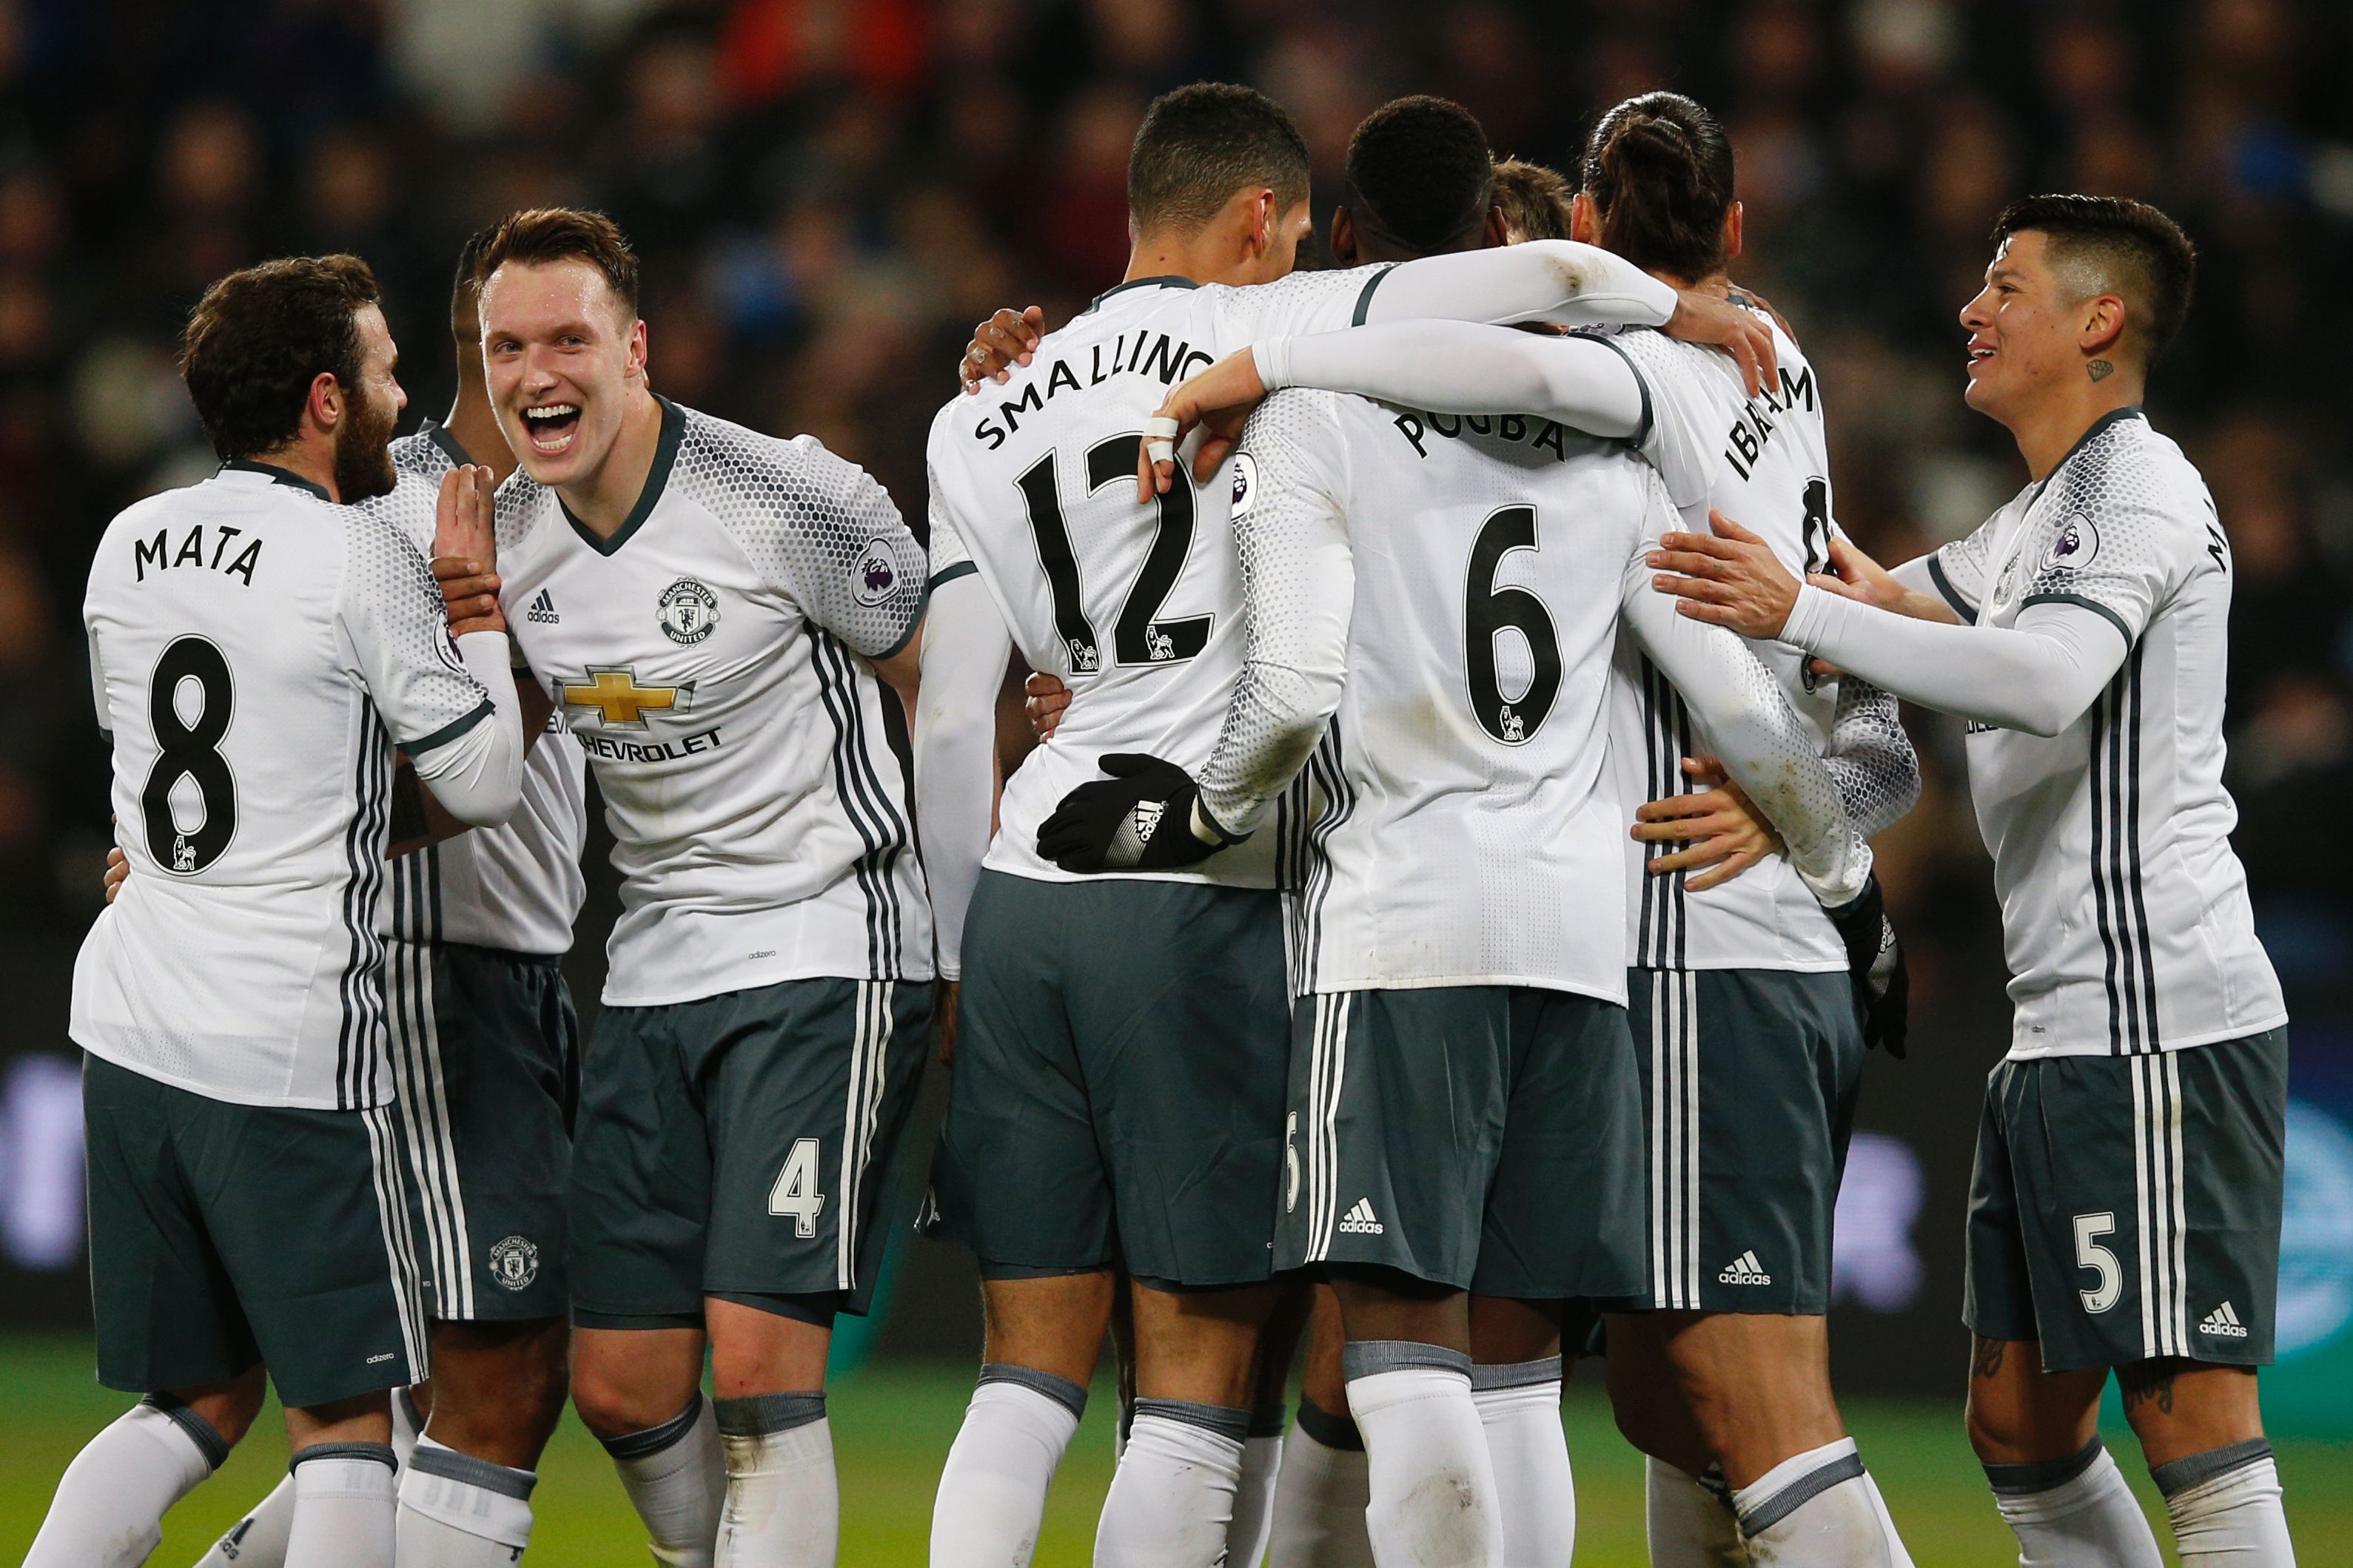 Manchester United's Swedish striker Zlatan Ibrahimovic (2nd R) celebrates with teammates after scoring their second goal during the English Premier League football match between West Ham United and Manchester United at The London Stadium, in east London on January 2, 2017.
Manchester United won the game 2-0. (Photo by Adrian Dennis/AFP/Getty Images)